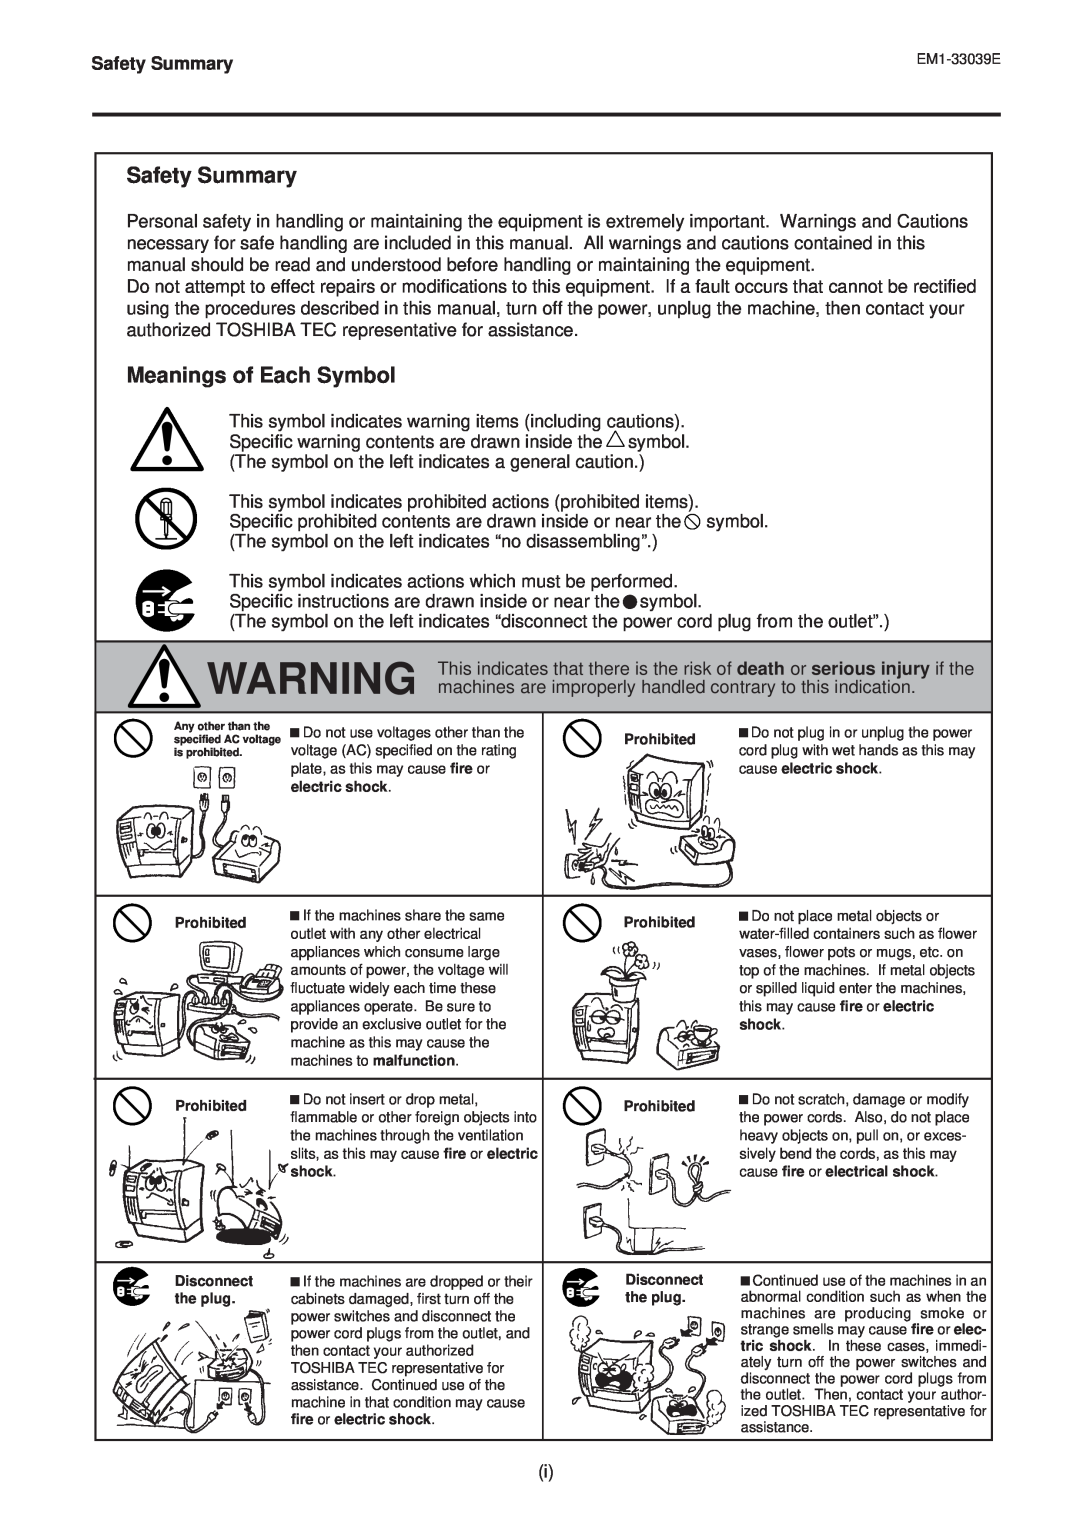 Toshiba EM1-33039EE, B-870 SERIES owner manual Safety Summary, Meanings of Each Symbol 